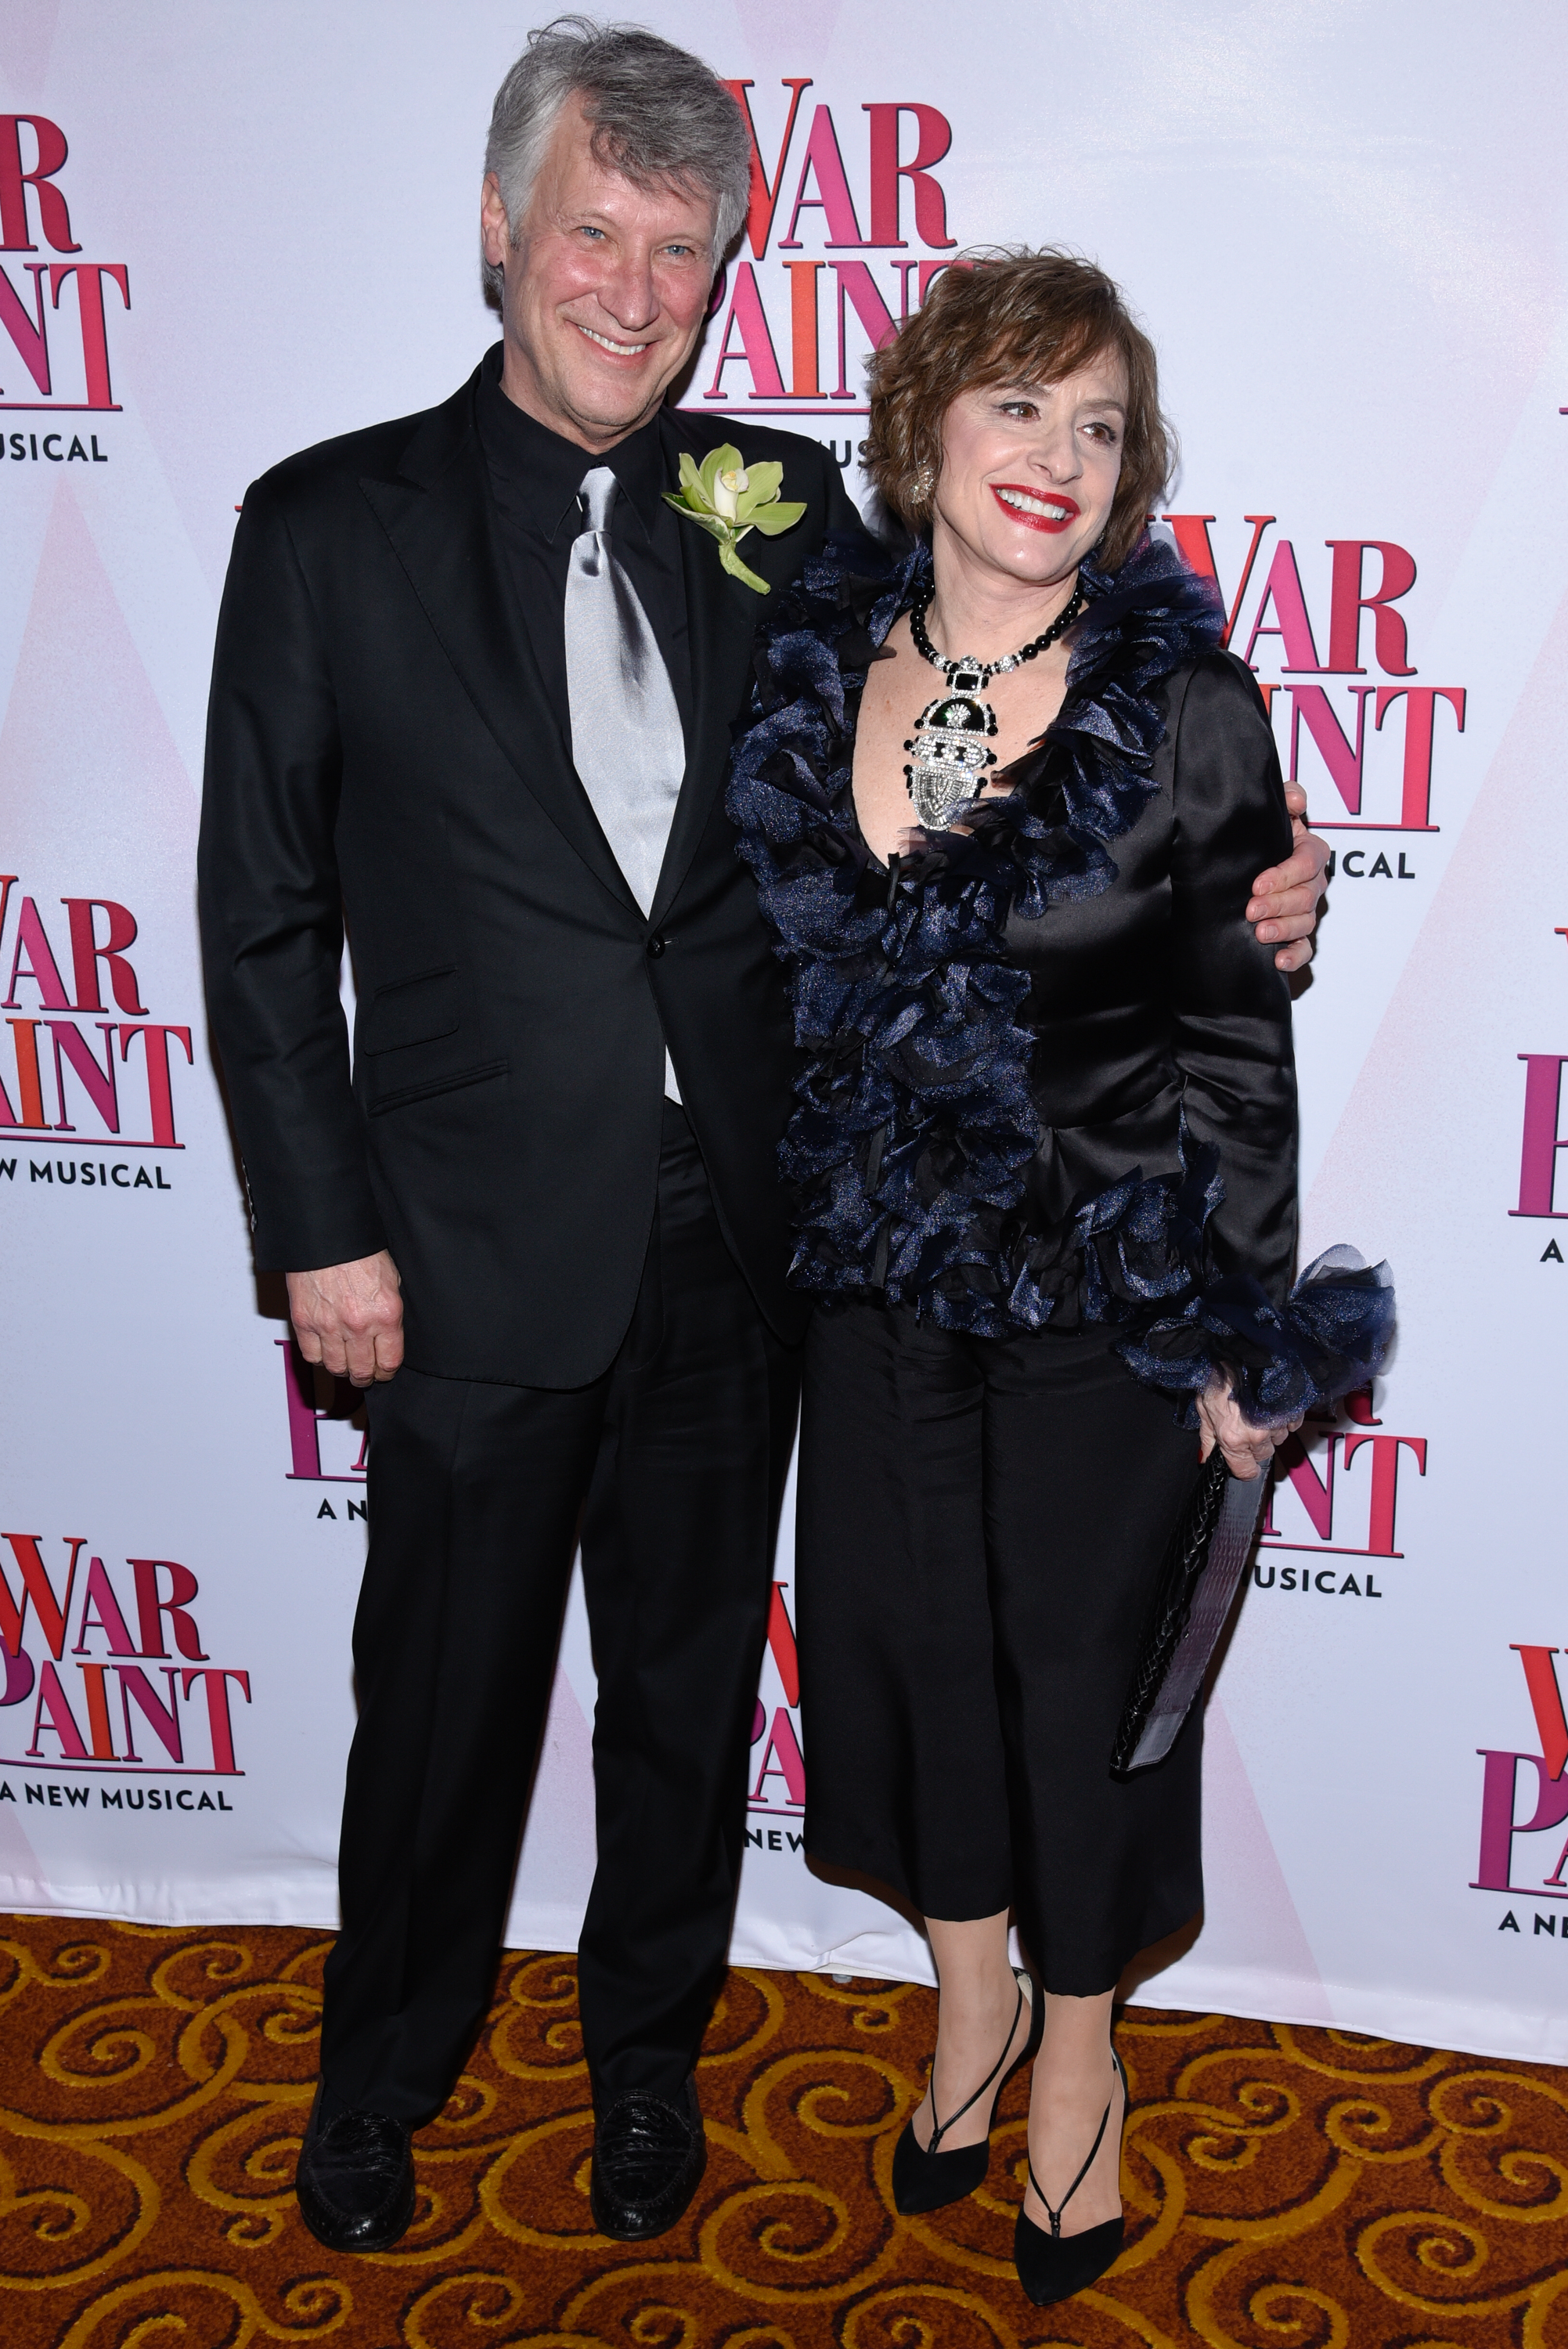 Patti LuPone and Matthew Johnston attend the "War Paint" Broadway opening night after party at Gotham Hall on April 6, 2017, in New York City | Source: Getty Images